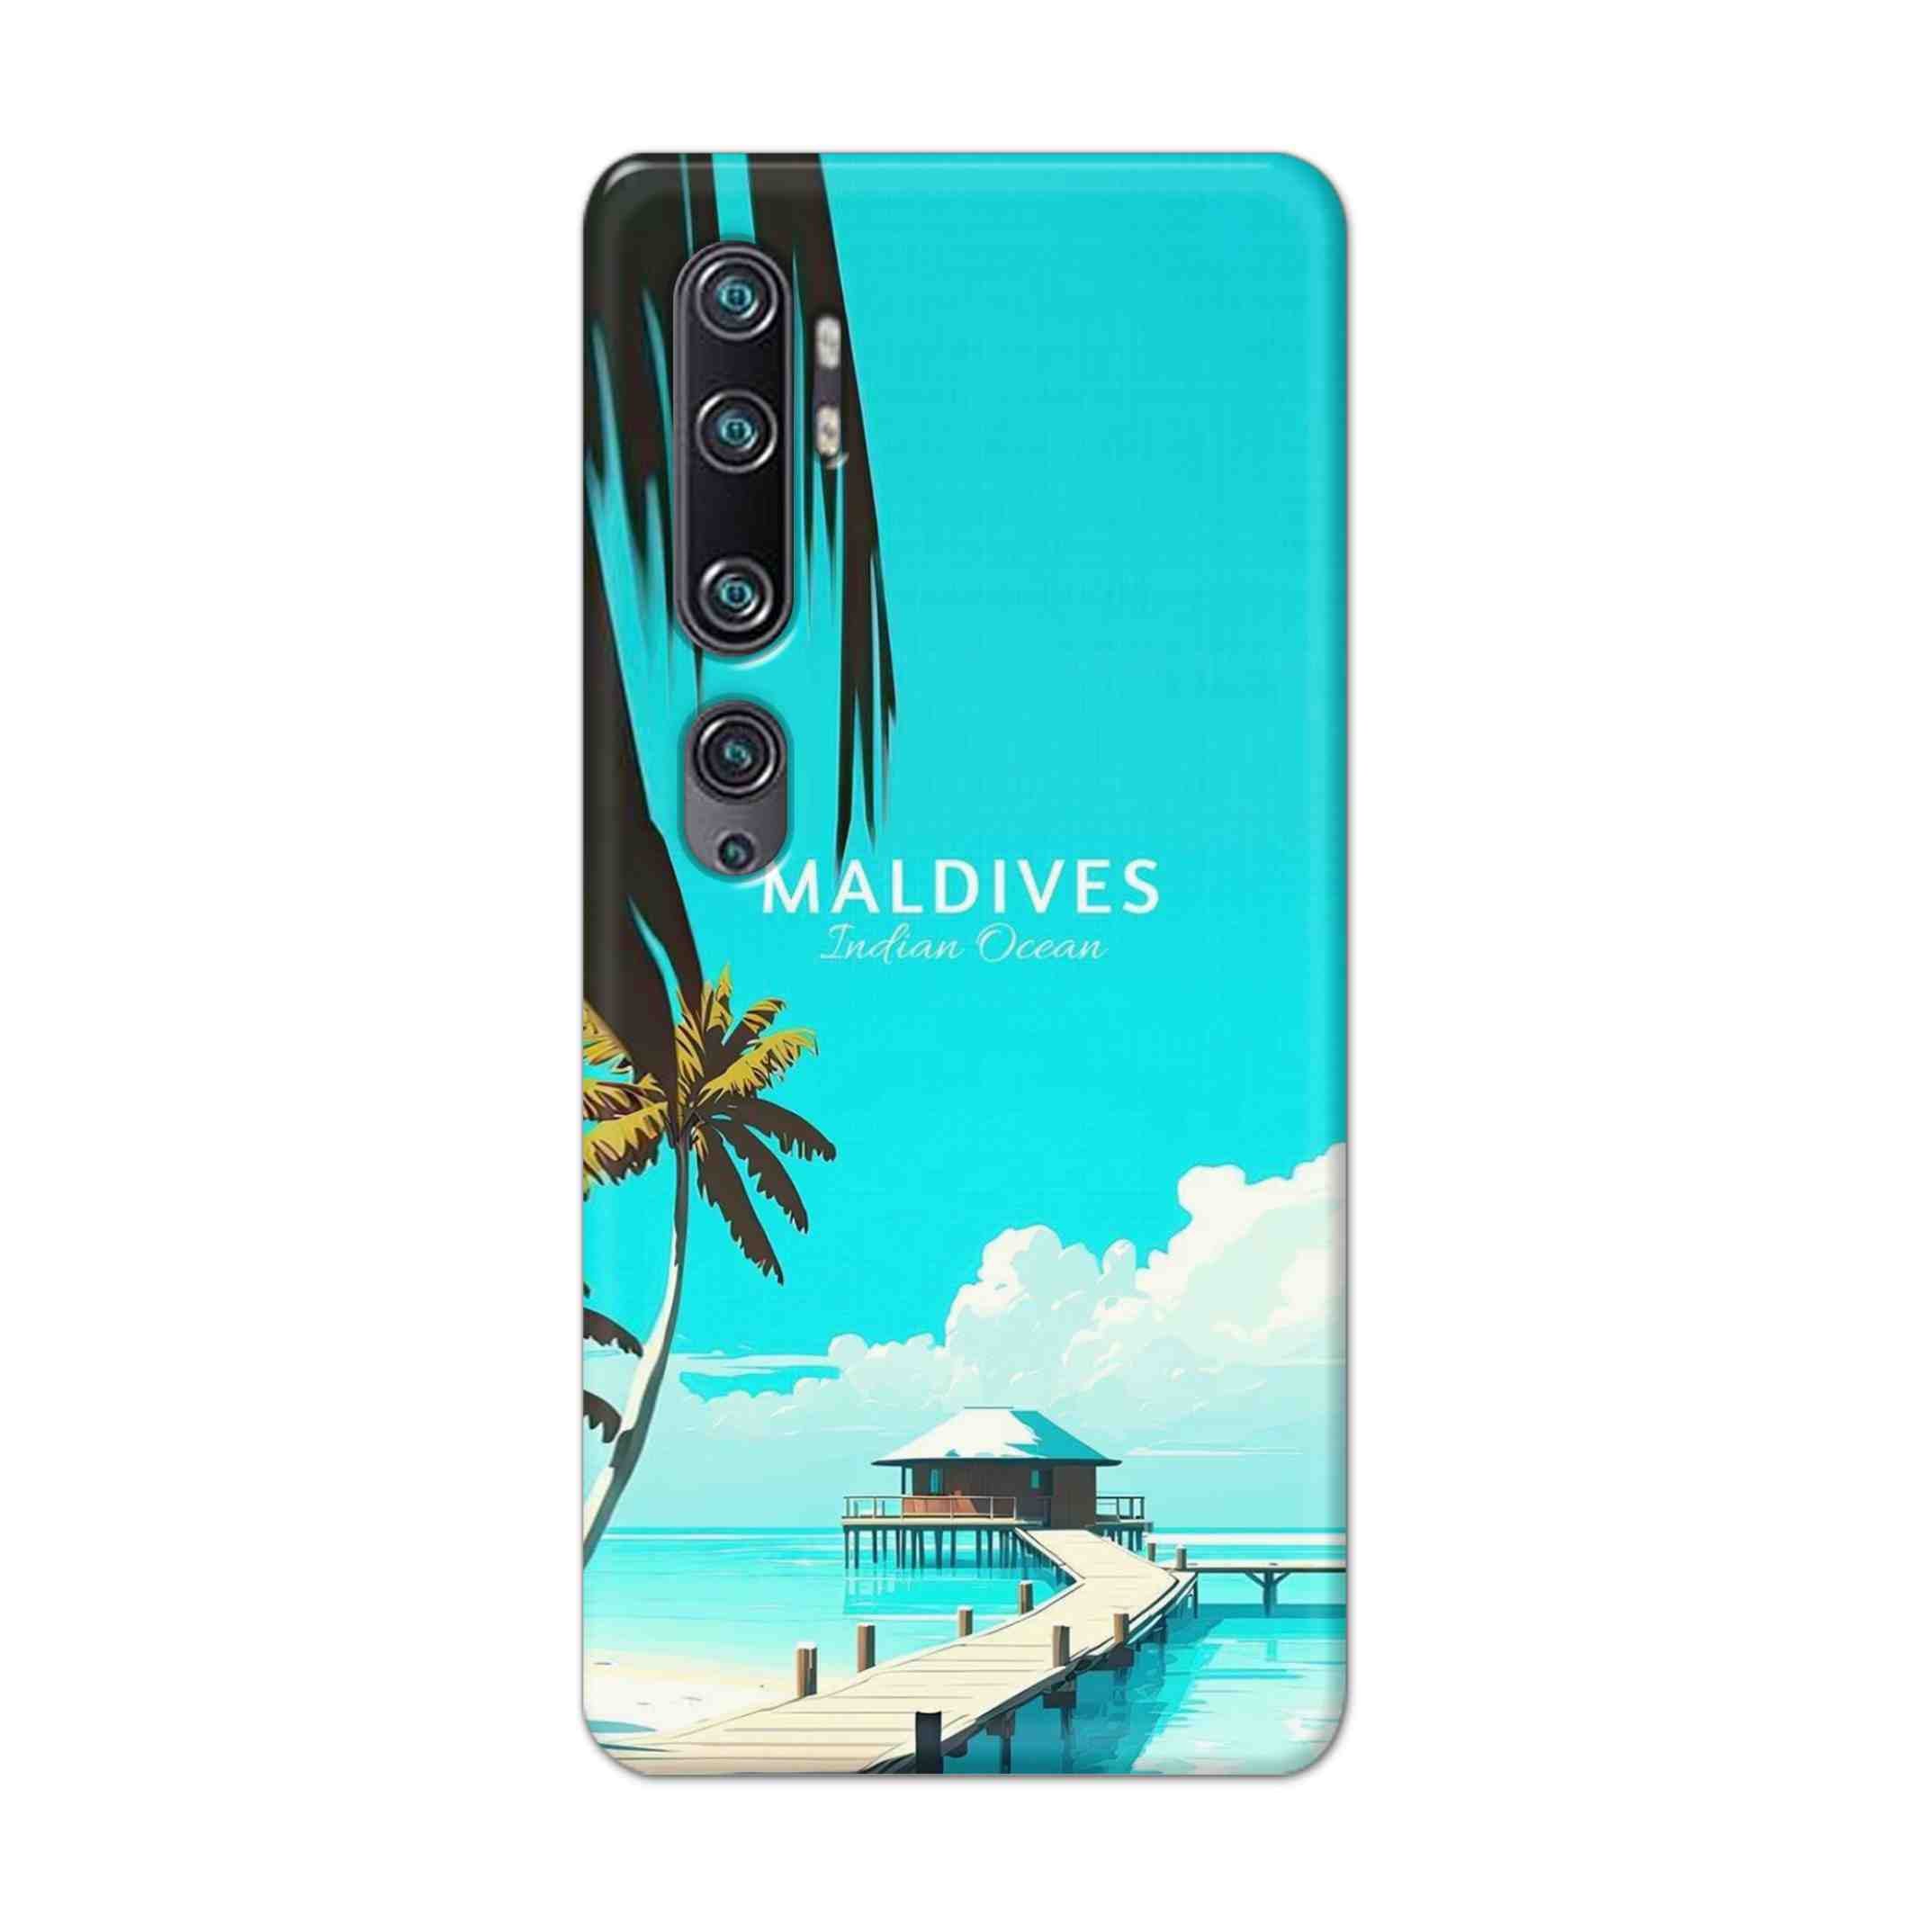 Buy Maldives Hard Back Mobile Phone Case Cover For Xiaomi Mi Note 10 Online